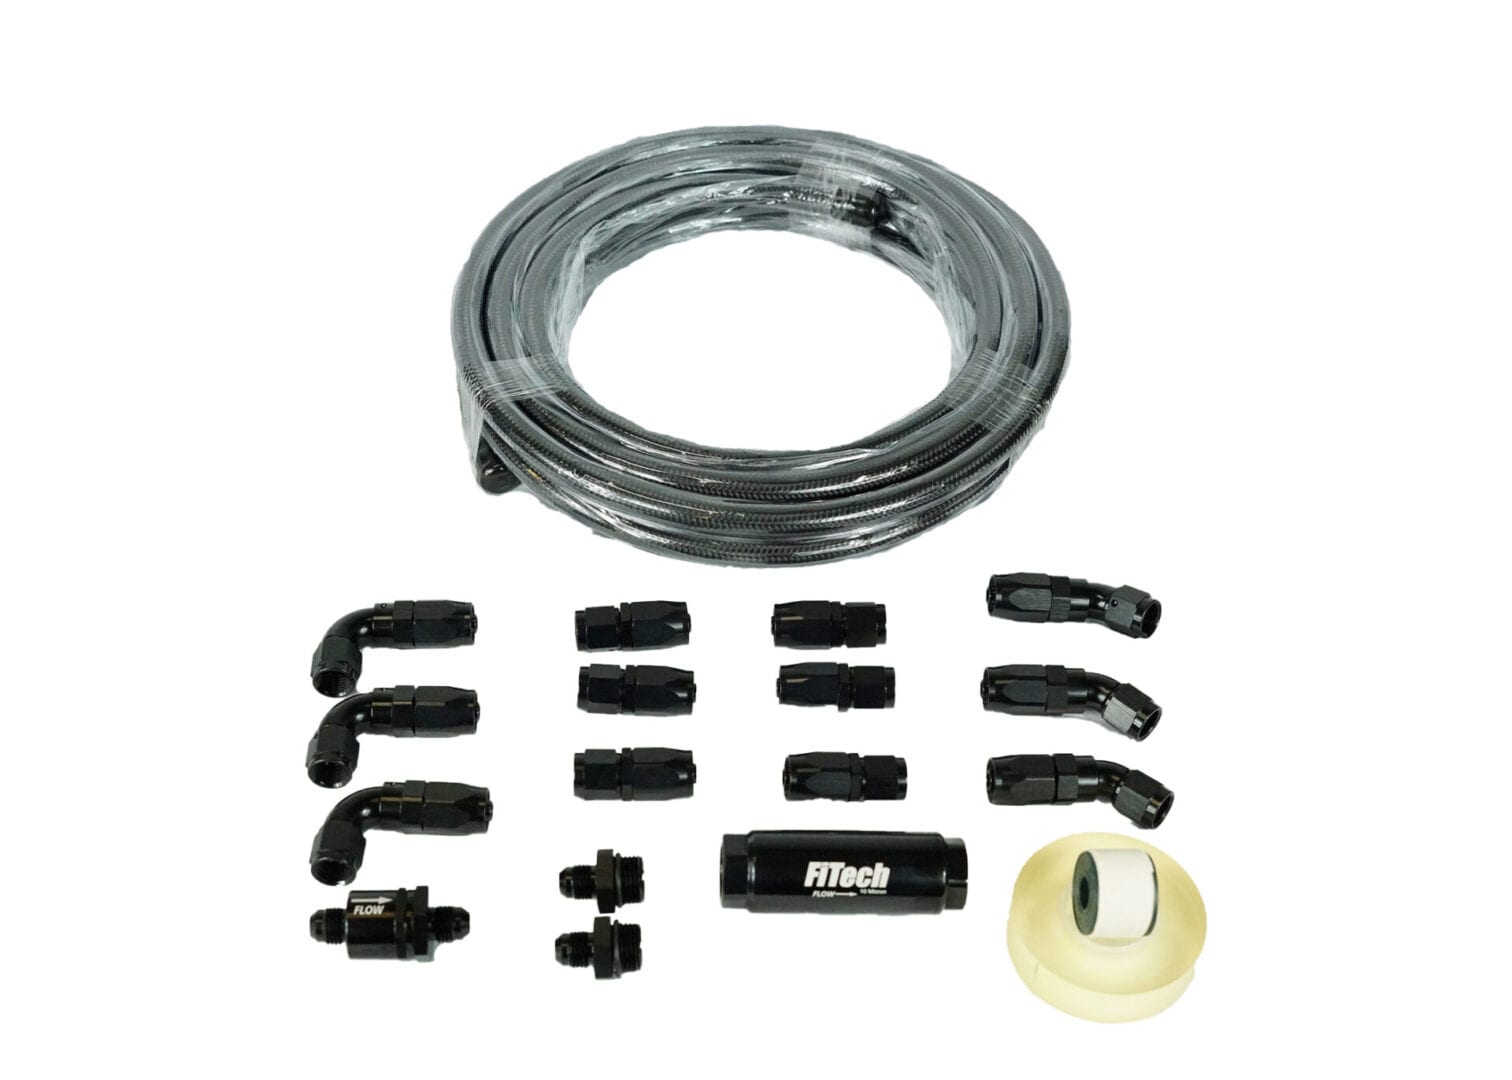 FiTech 51004 Black Stainless Steel Hose Kit, 40ft with 10 Micron Filter and Check Valve